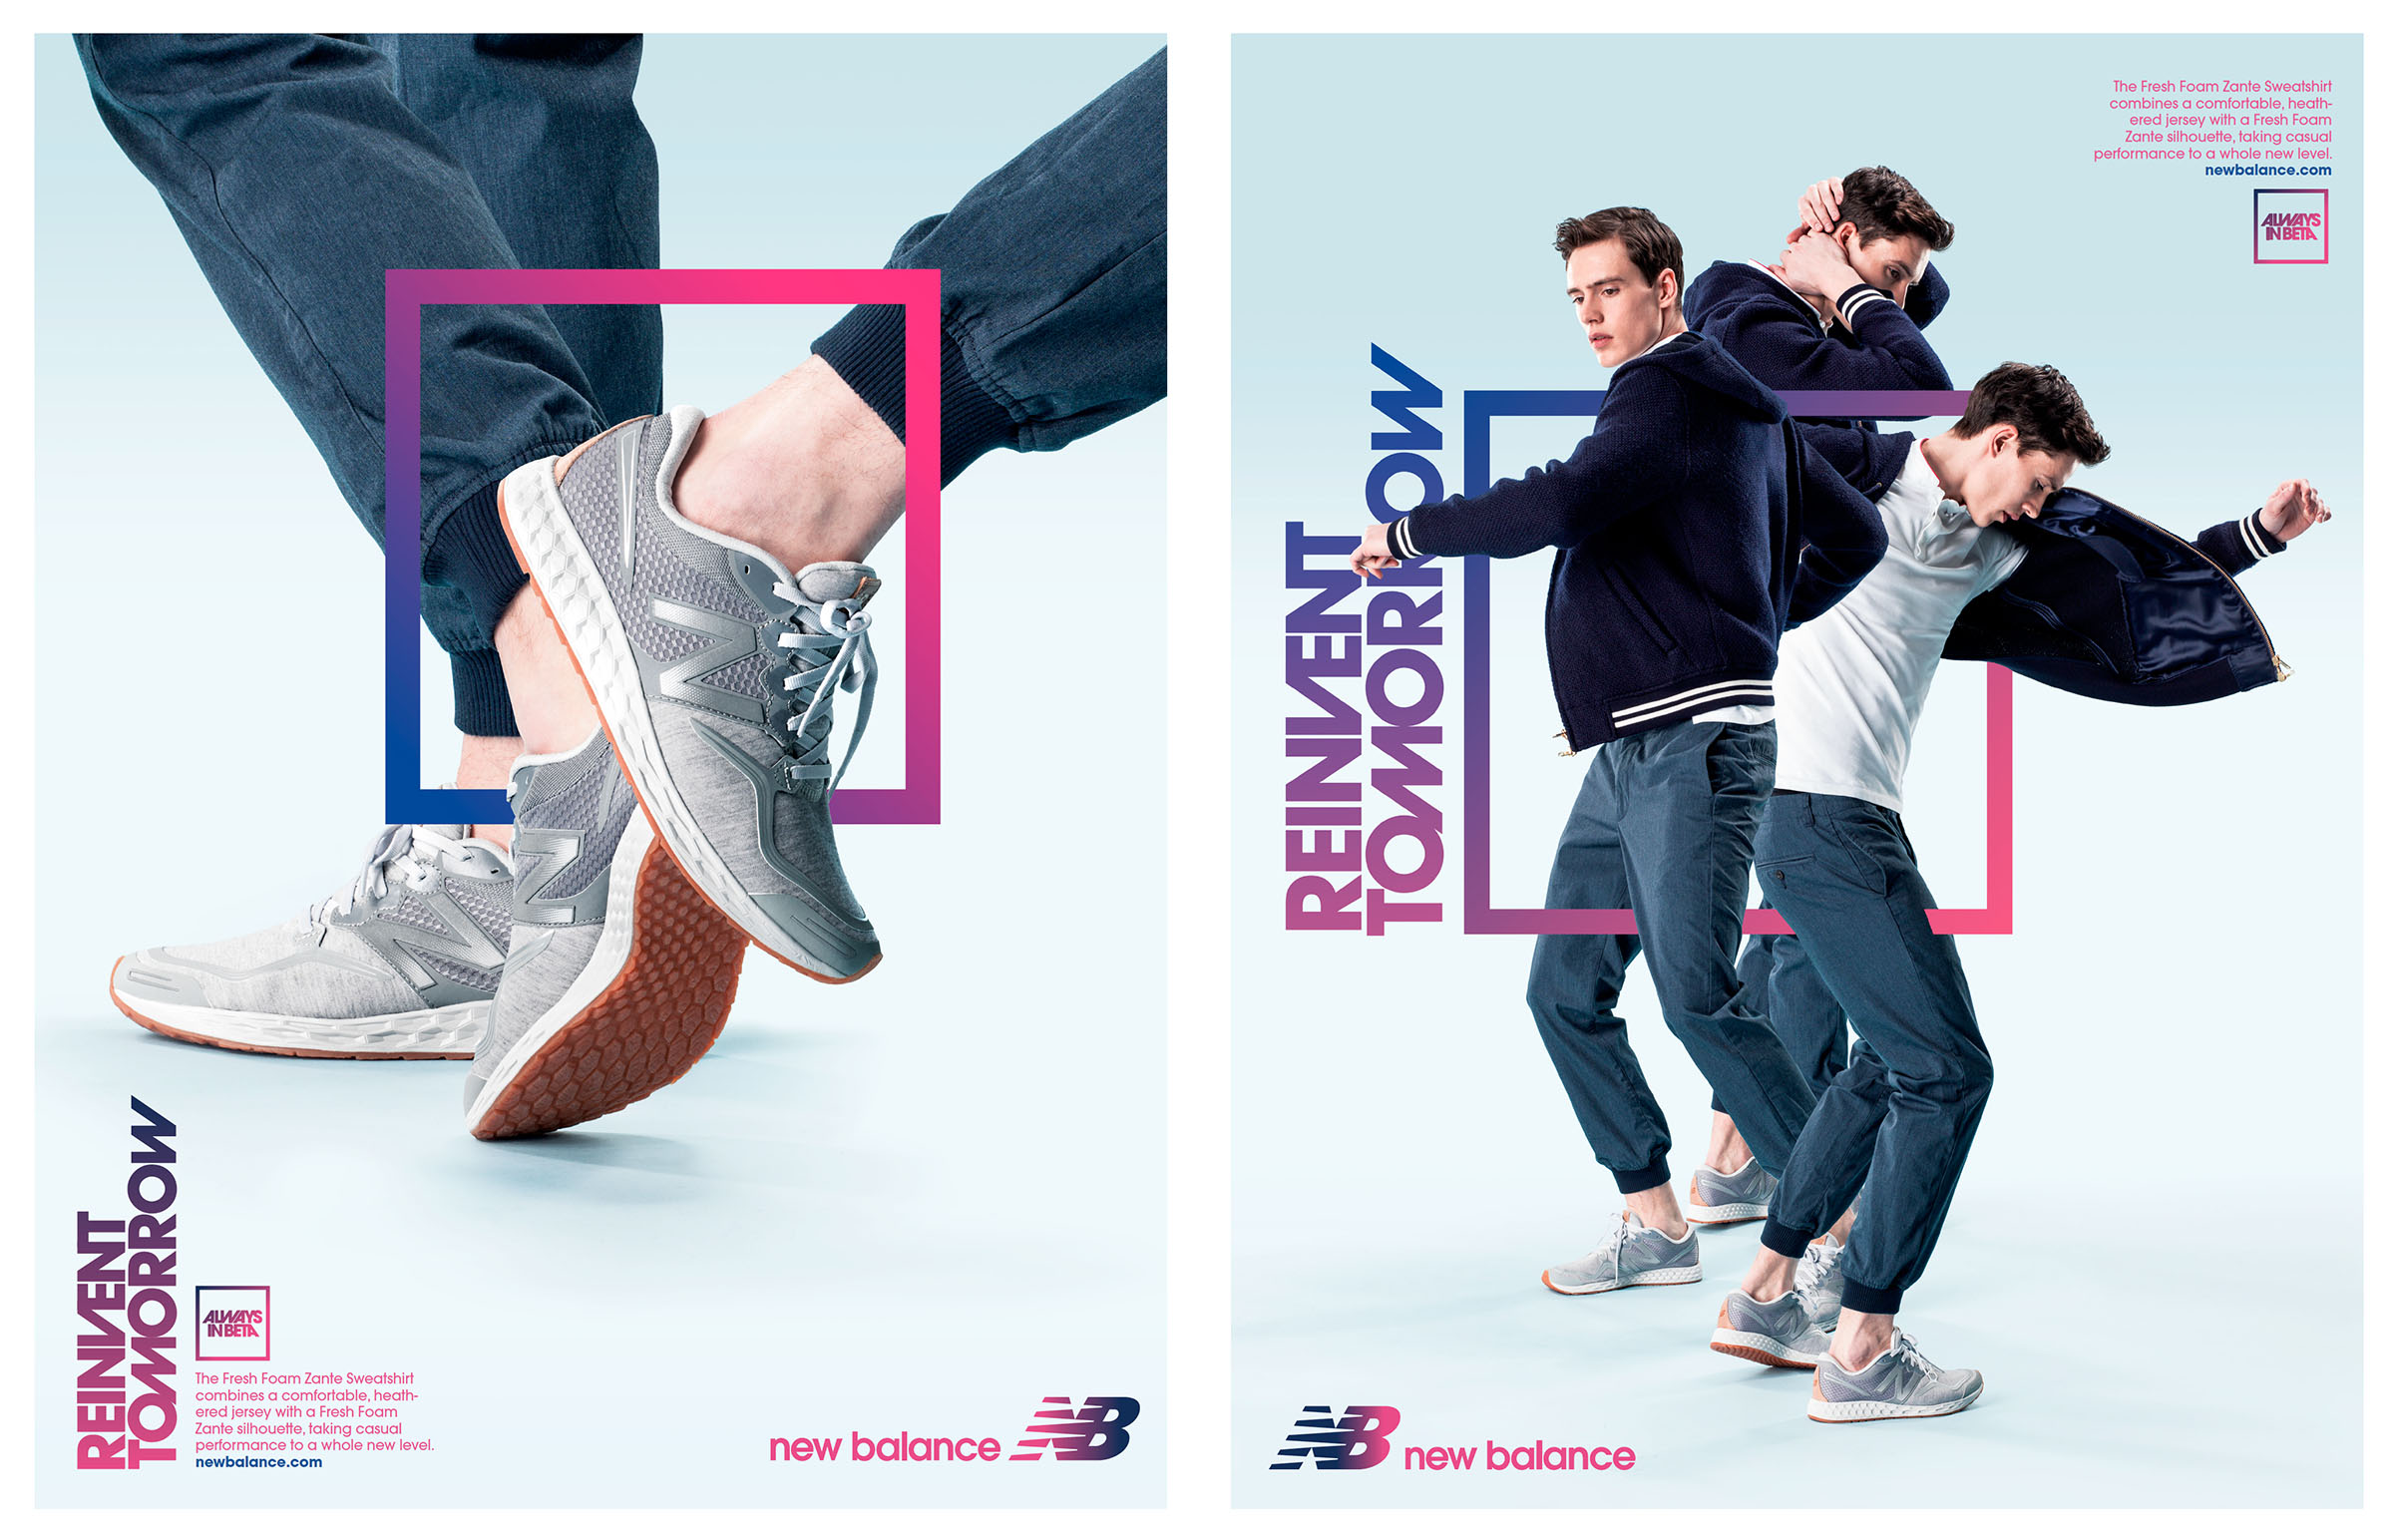   New Balance Omni Launch campaign and retail graphics.  